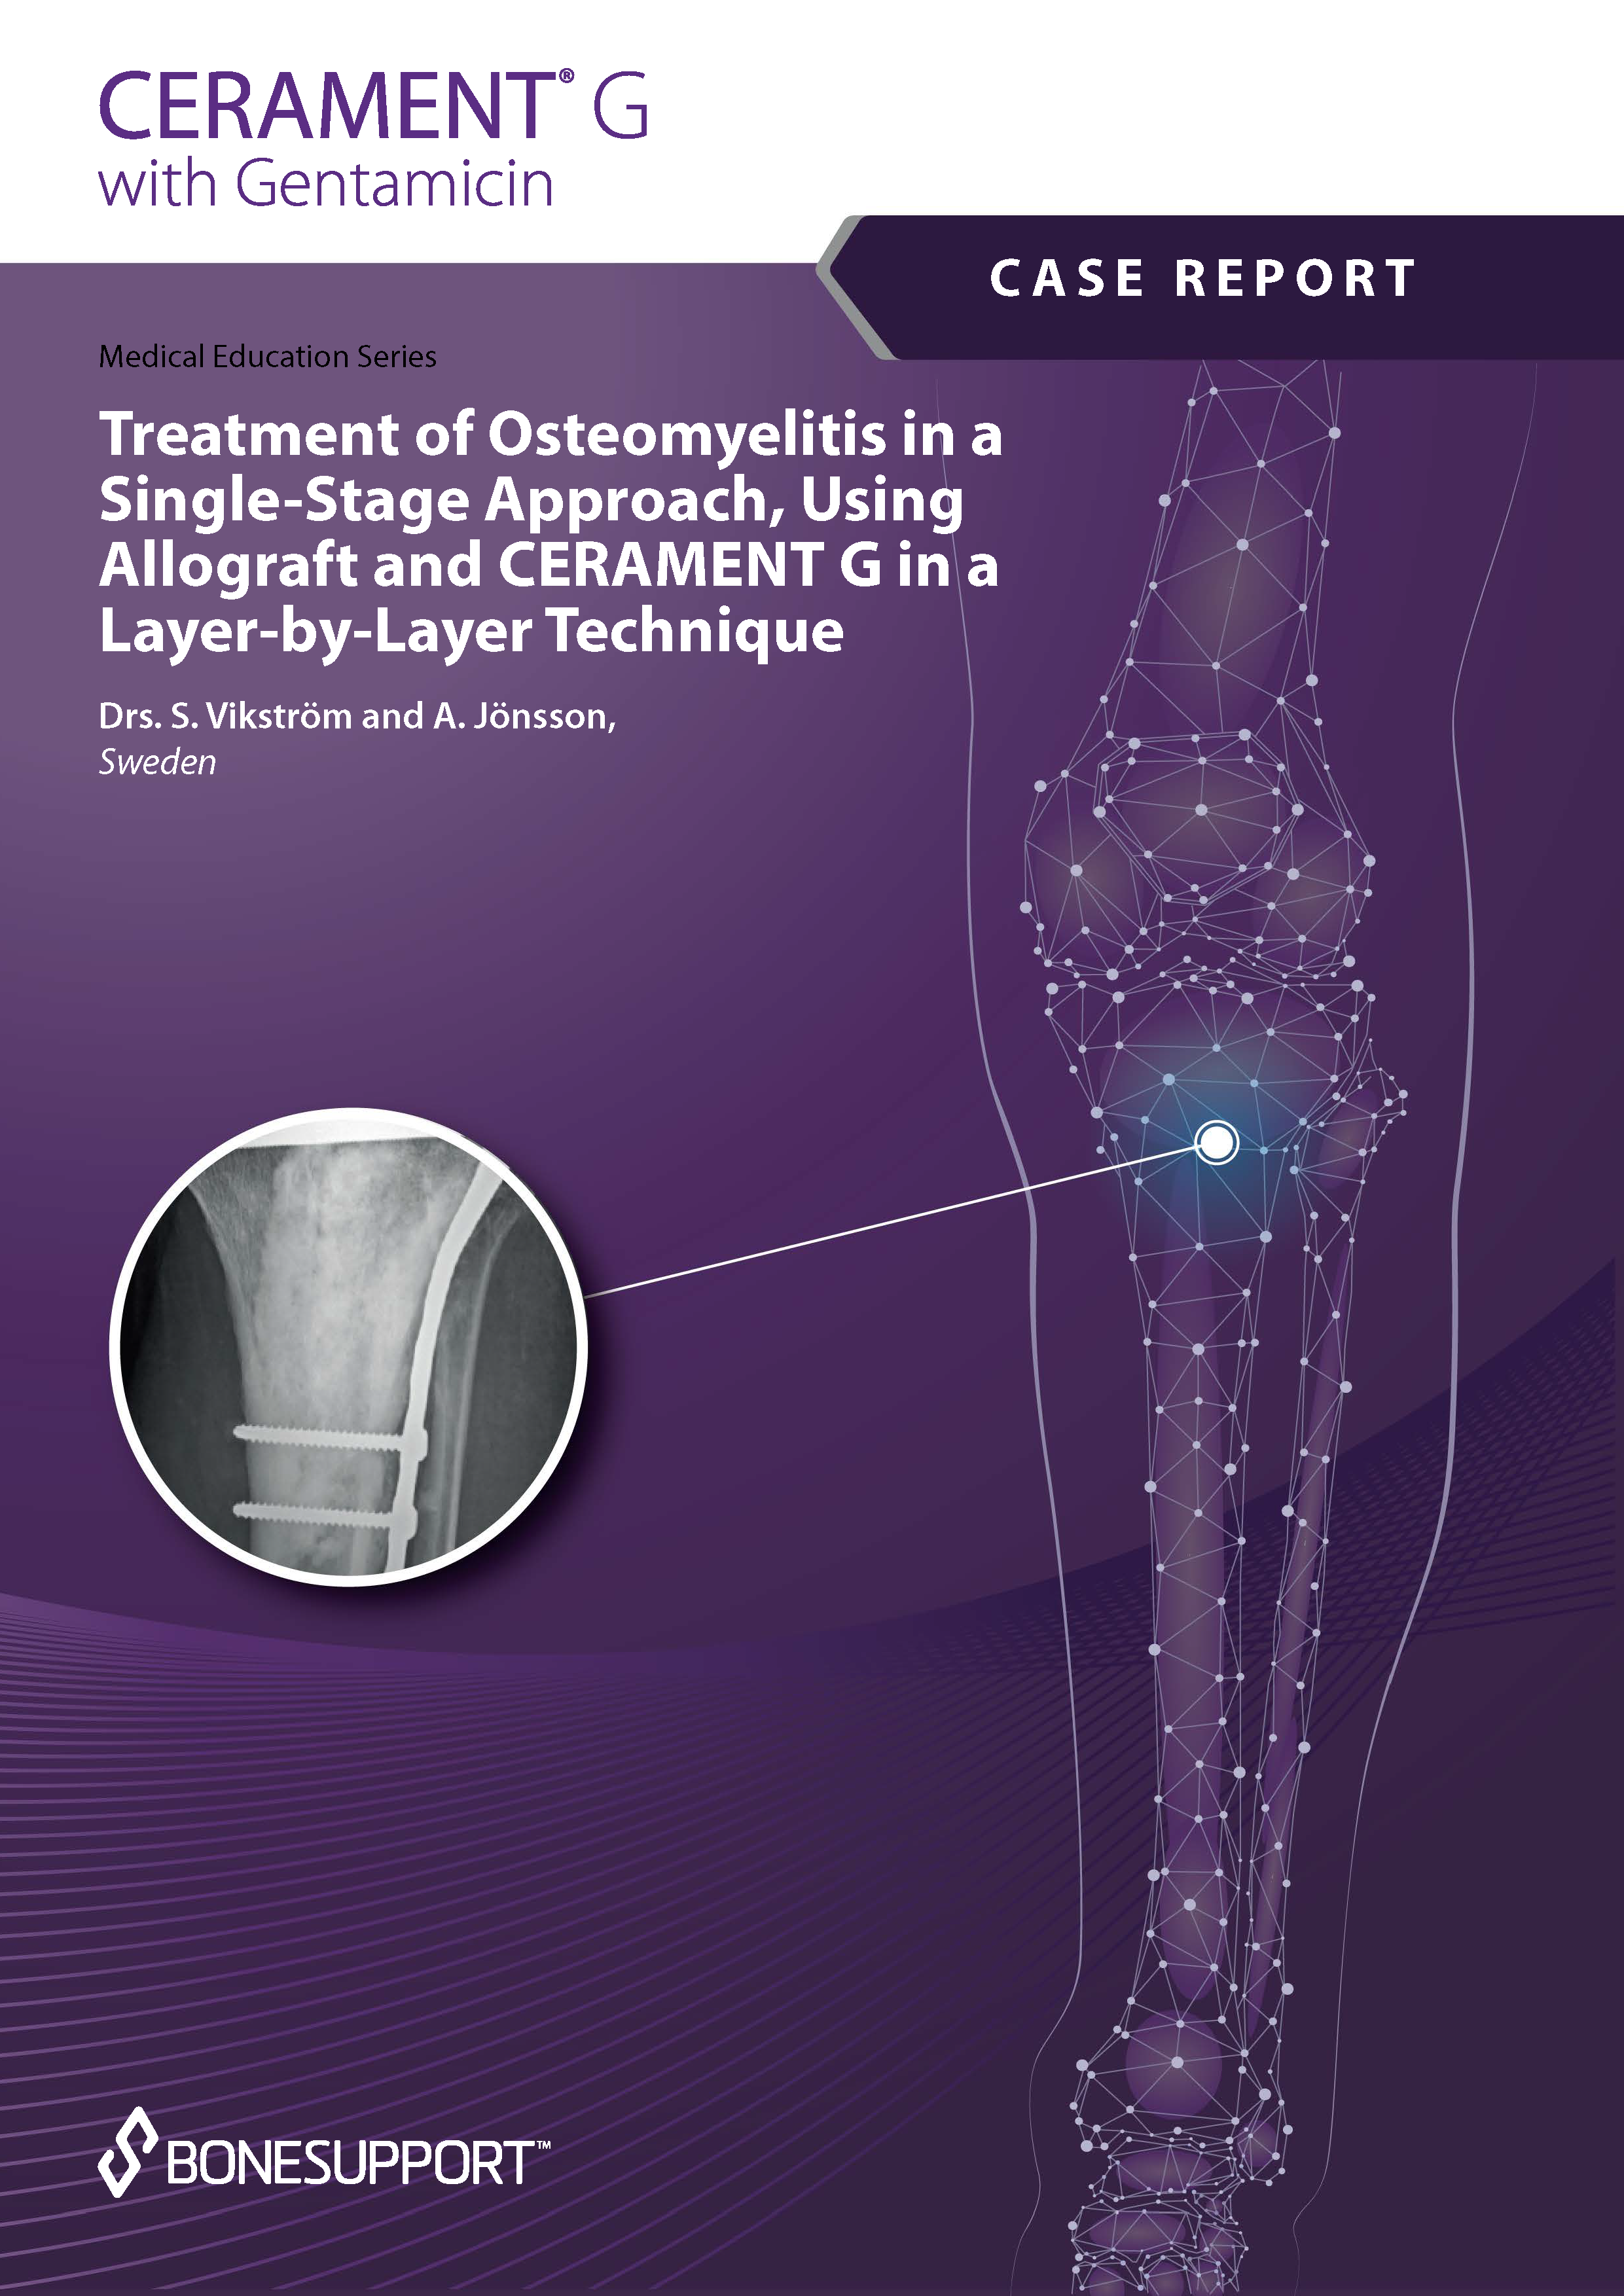 Vikstrom – Treatment of osteomyelitis in a single-stage approach, using allograft and CERAMENT™|G in a layer-by-layer technique